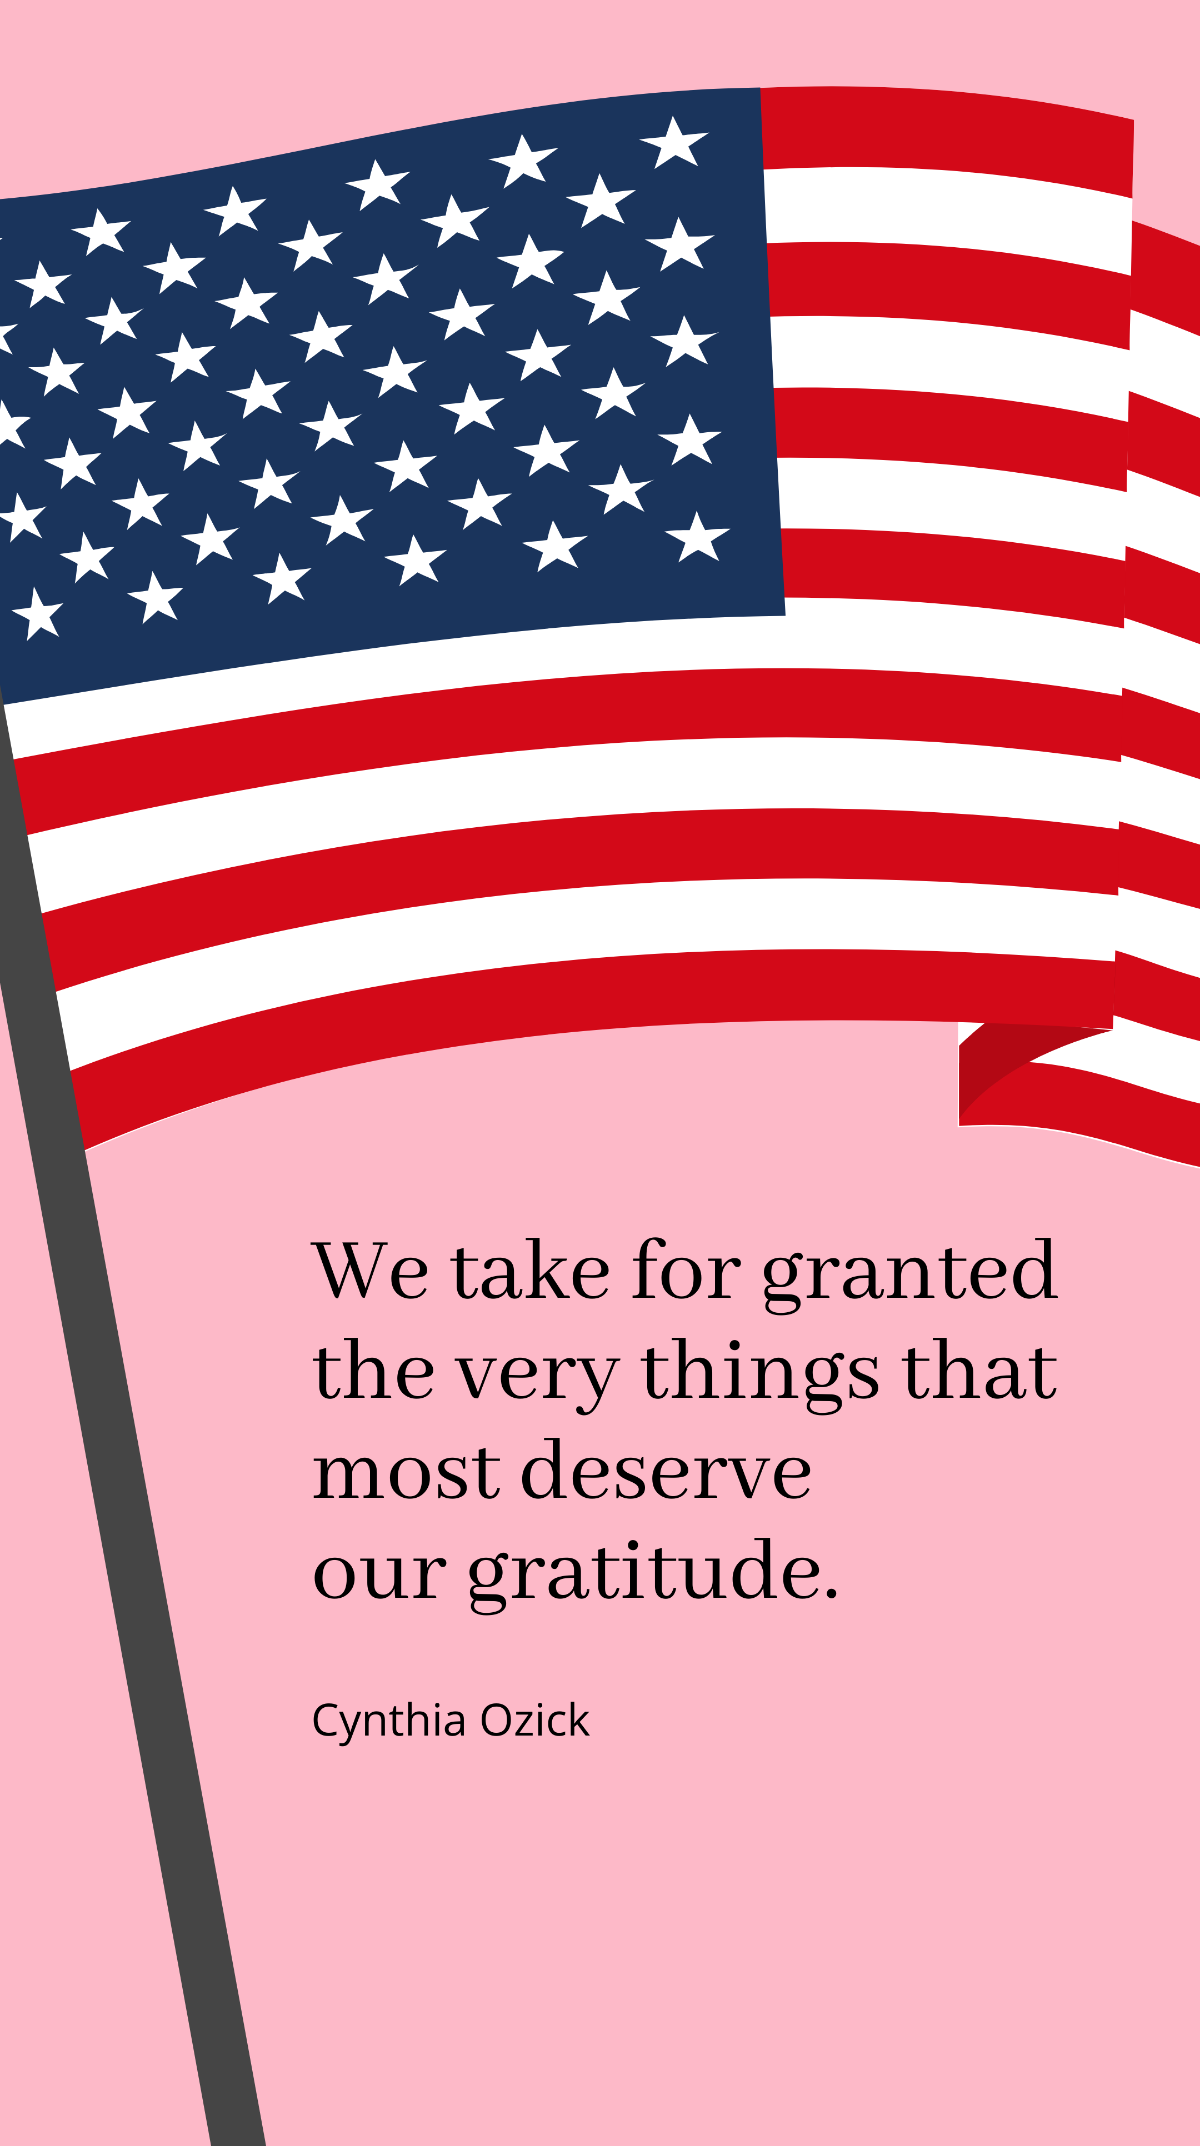 Cynthia Ozick - We take for granted the very things that most deserve our gratitude Template